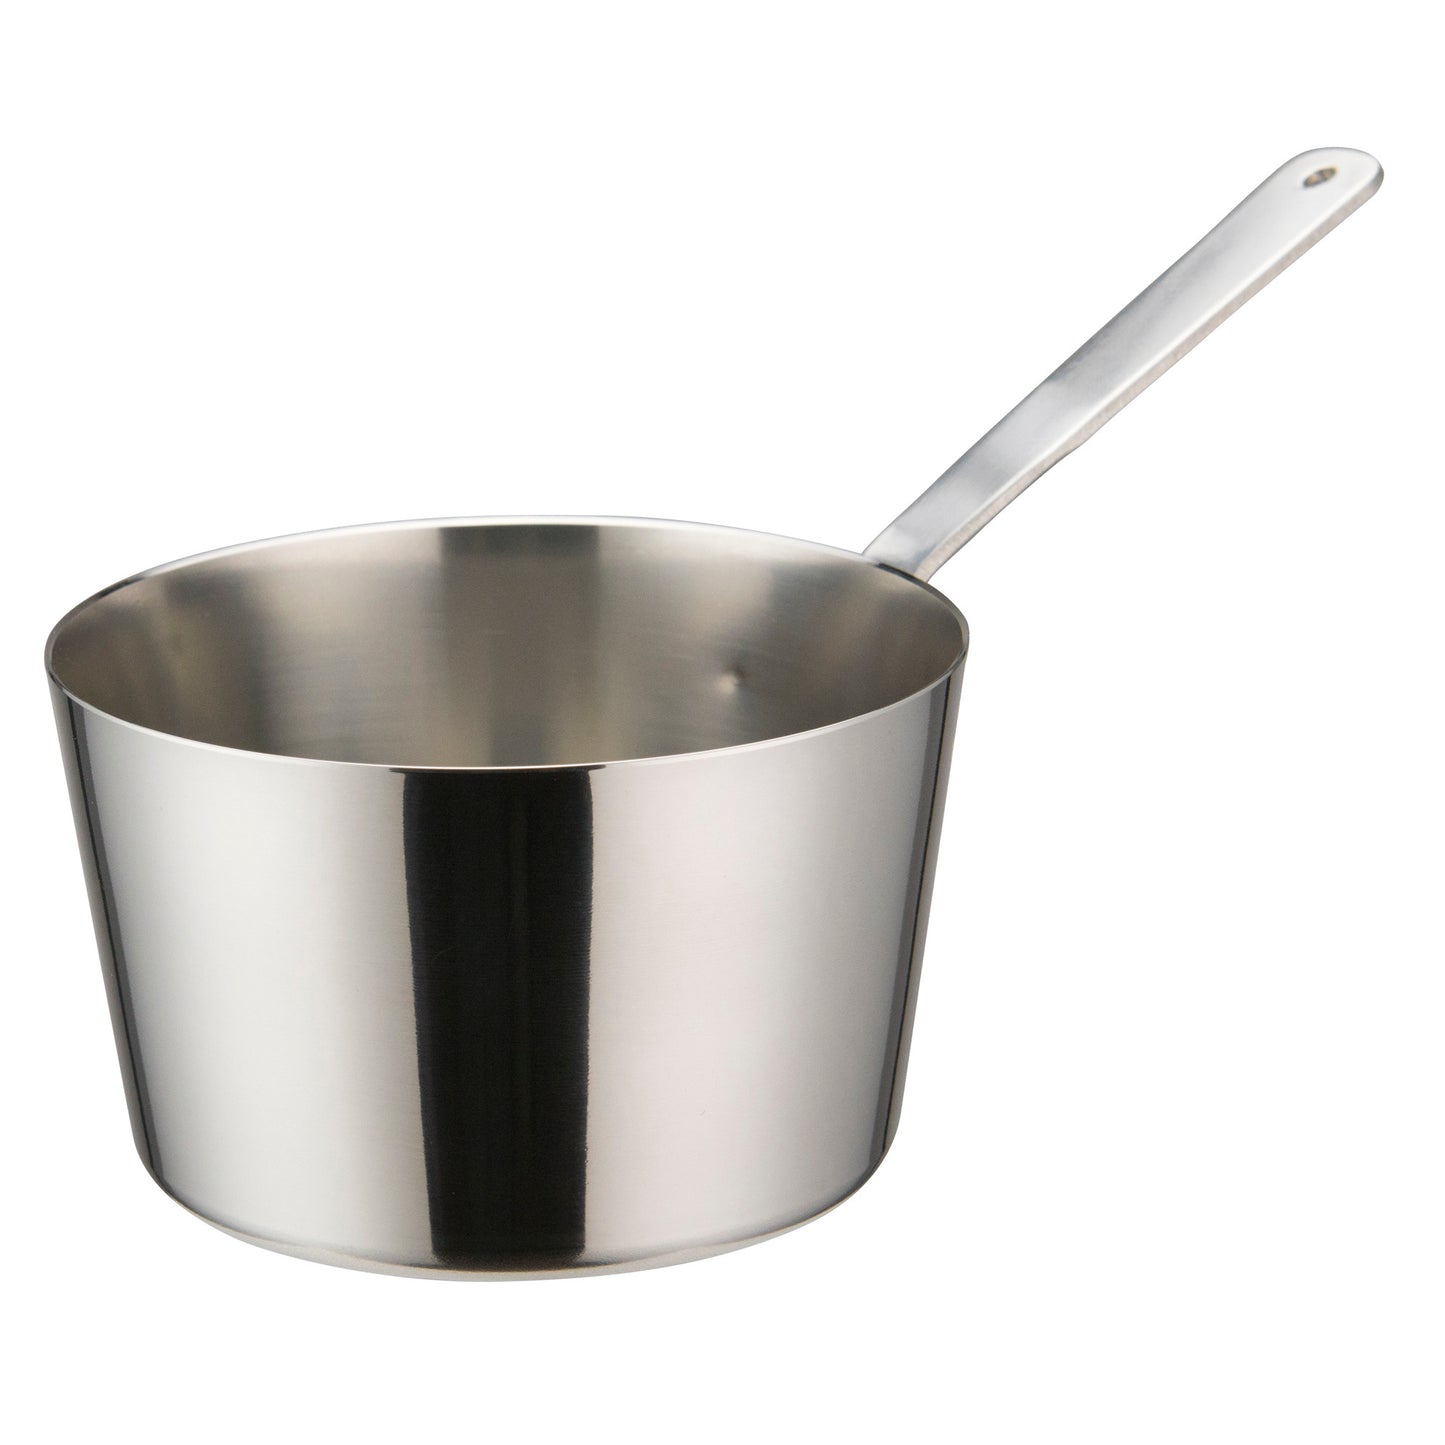 DCWB-103S - Mini Tapered Sauce Pan, Stainless Steel - 4"